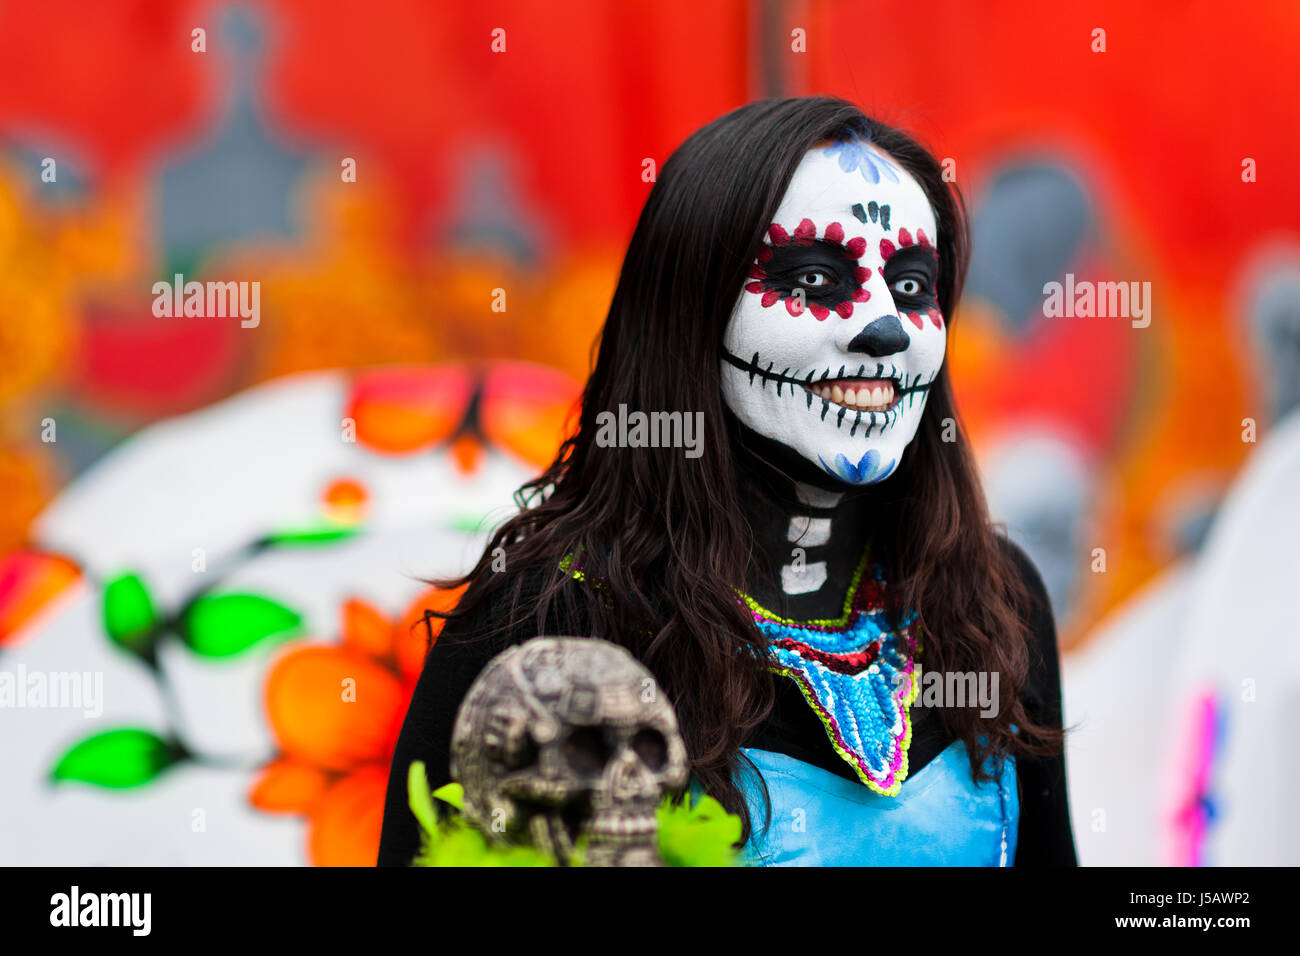 A young woman, dressed as La Catrina, takes part in the Day of the Dead festival in Mexico City, Mexico. Stock Photo